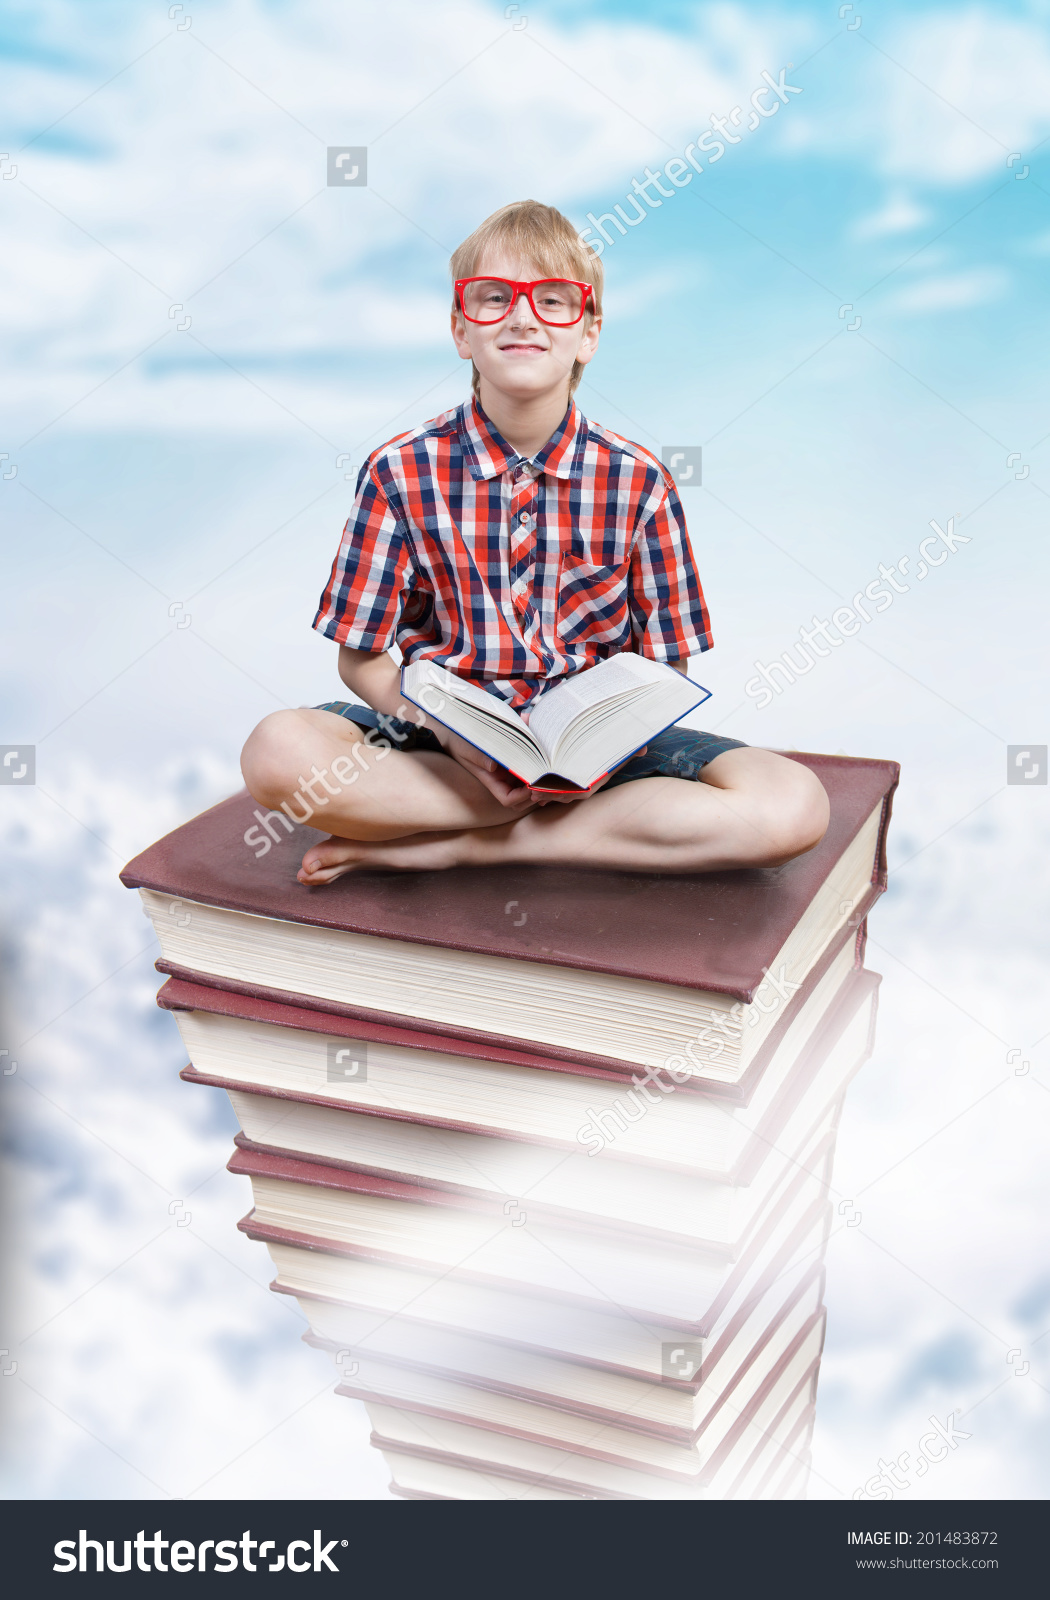 stock-photo-the-tower-of-knowledge-education-concept-201483872